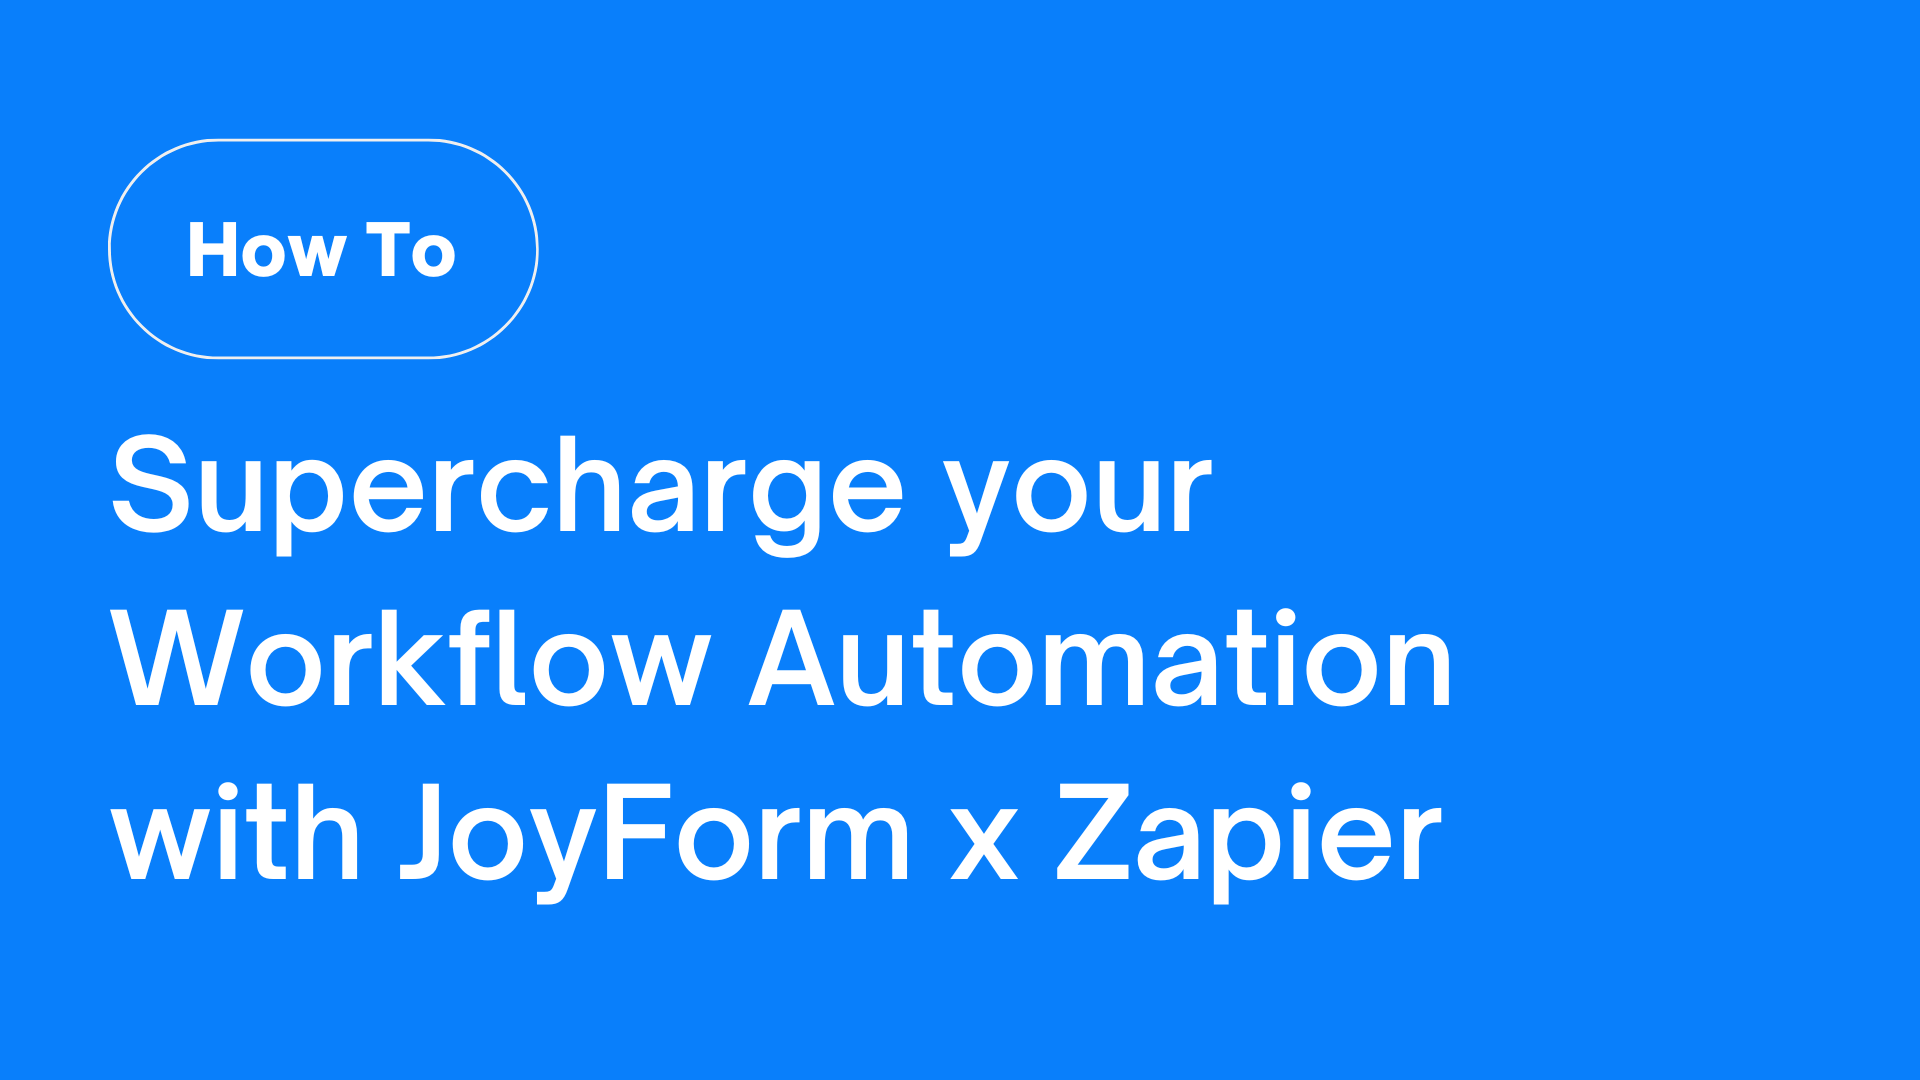 [How To] Supercharge your Workflow Automation with JoyForm Notifications on Zapier